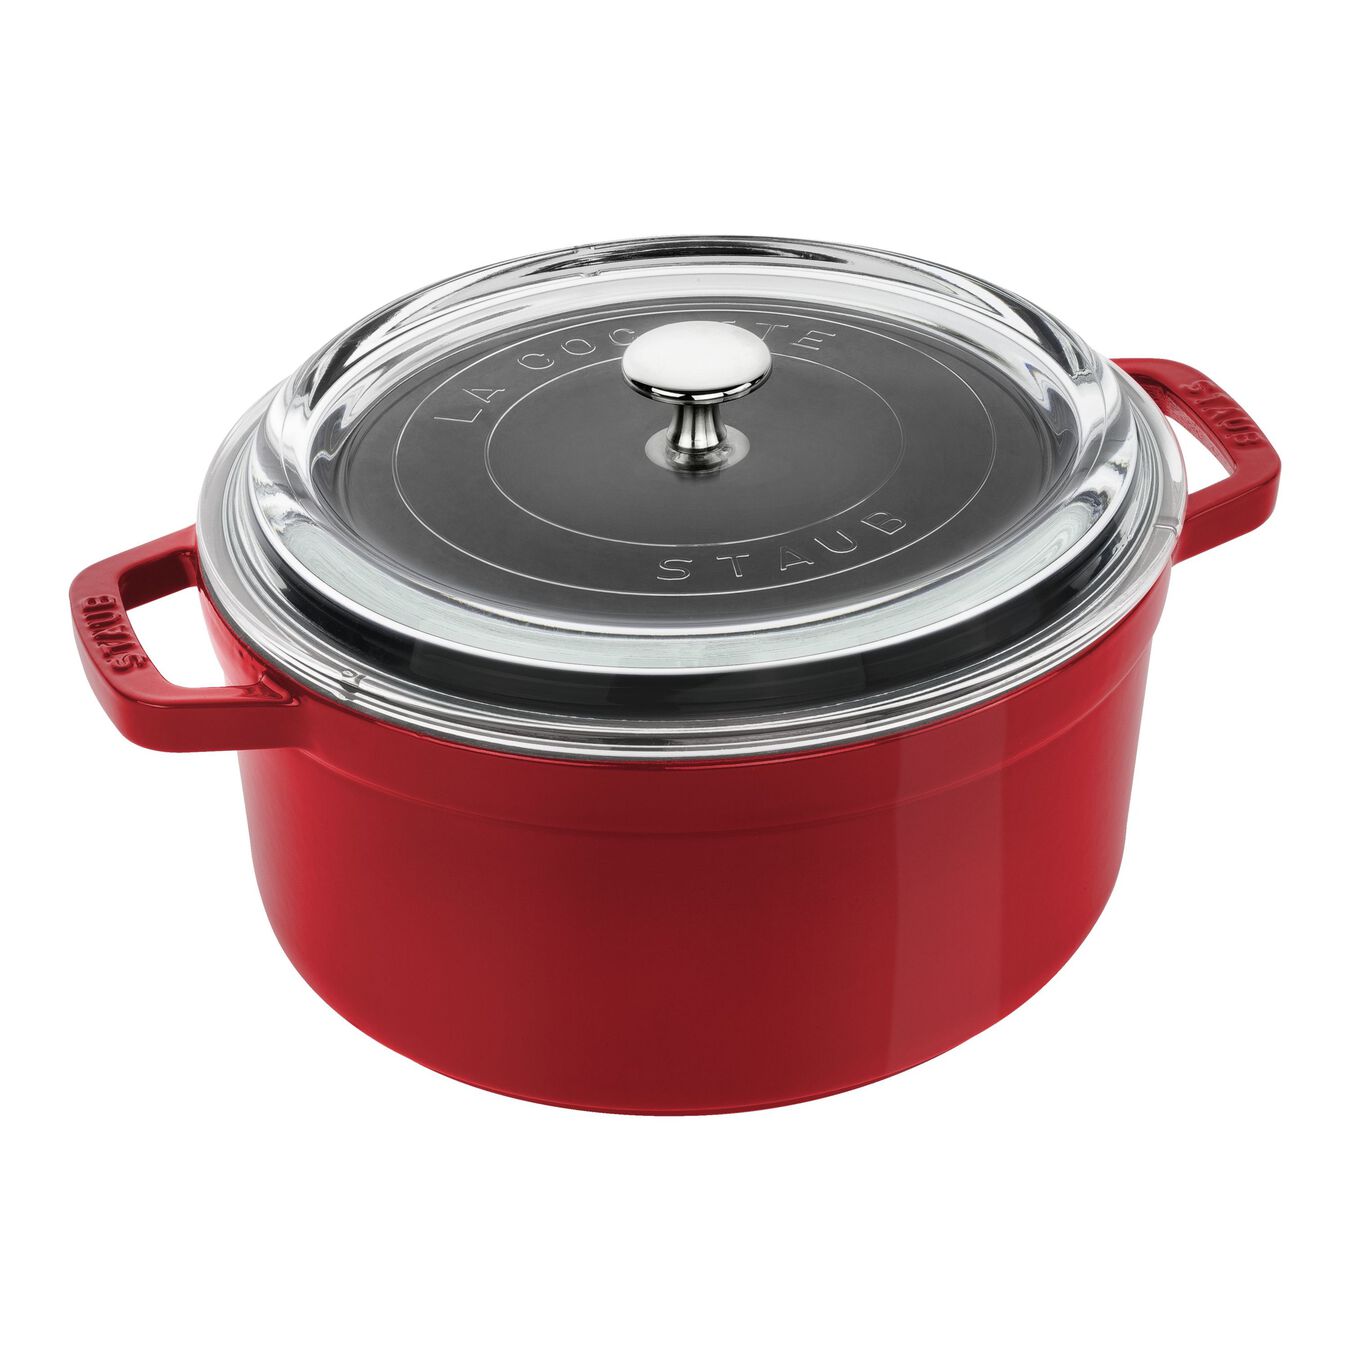 3.8 l cast iron round Cocotte with glass lid, cherry,,large 1